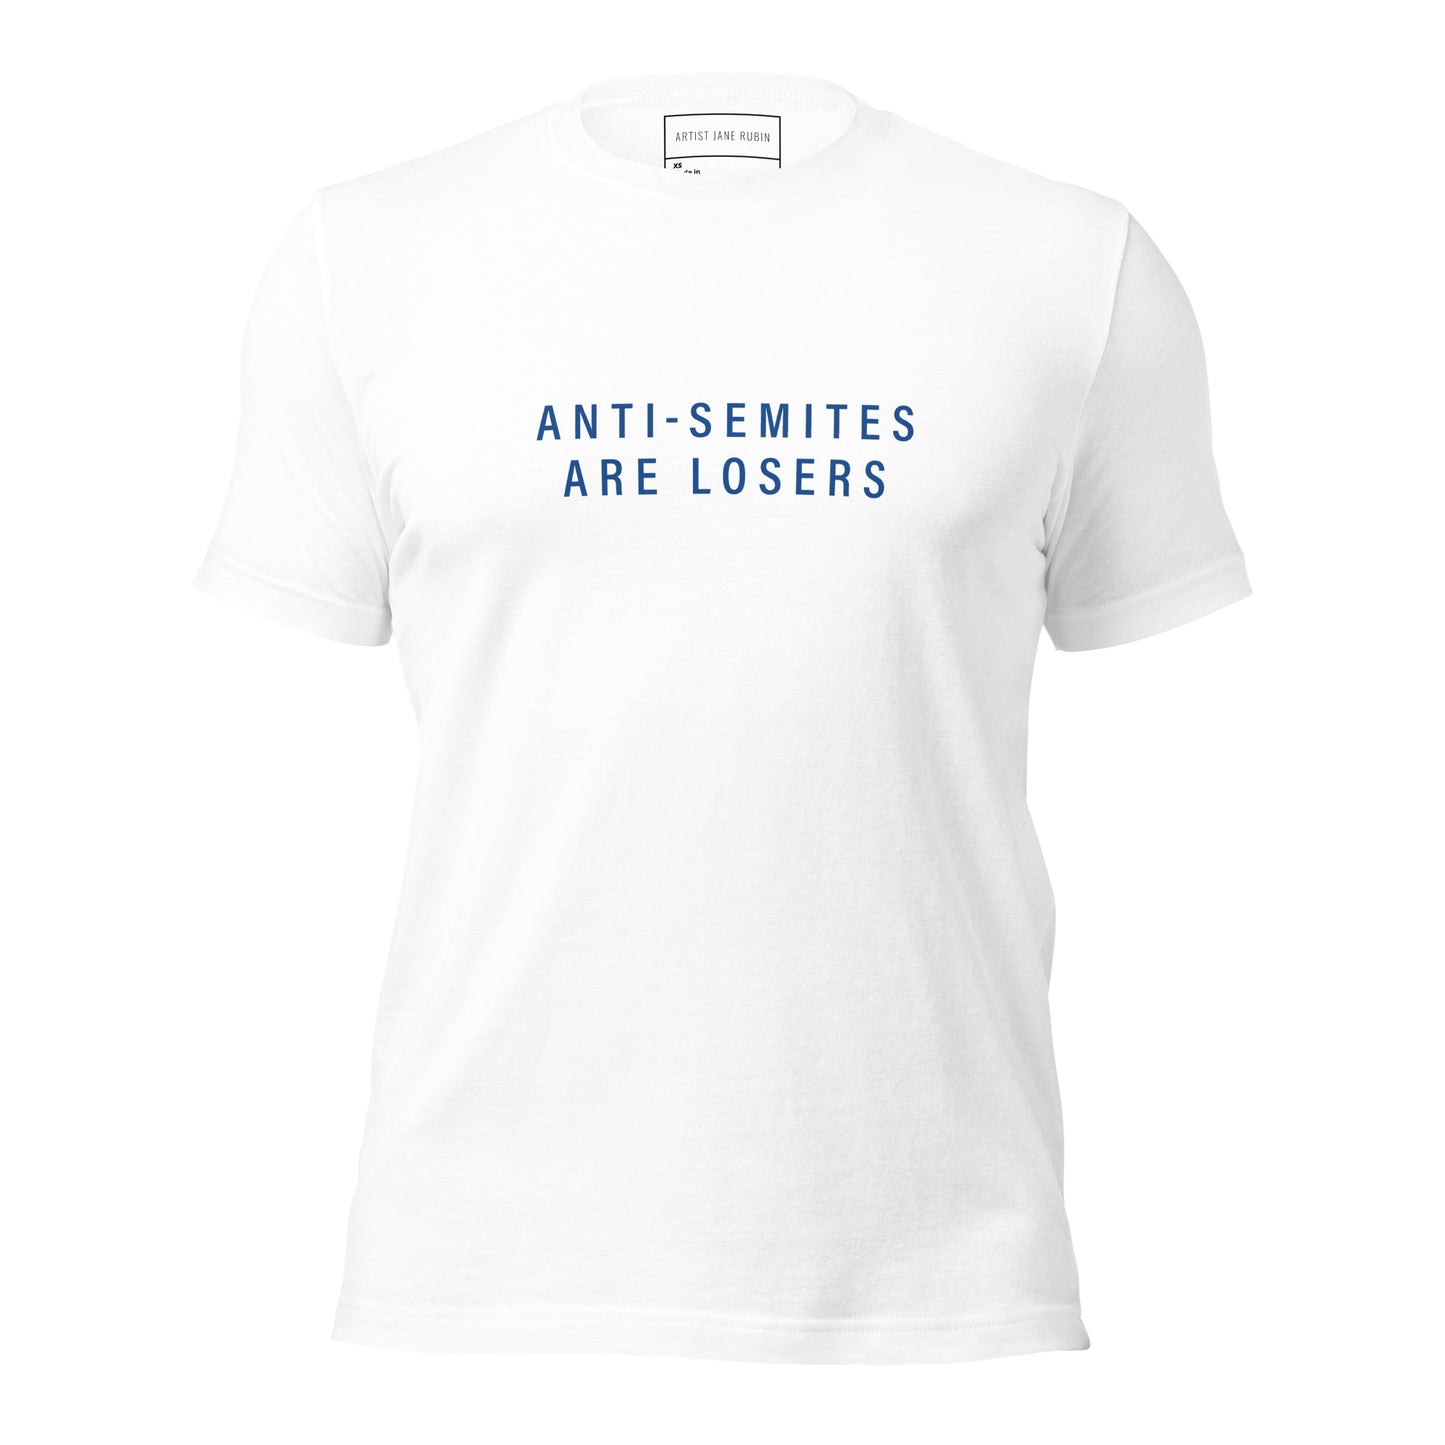 Anti-Semites are Losers Ring-Spun, Combed Cotton Message Tee — Men's Shirts — Women's Shirts